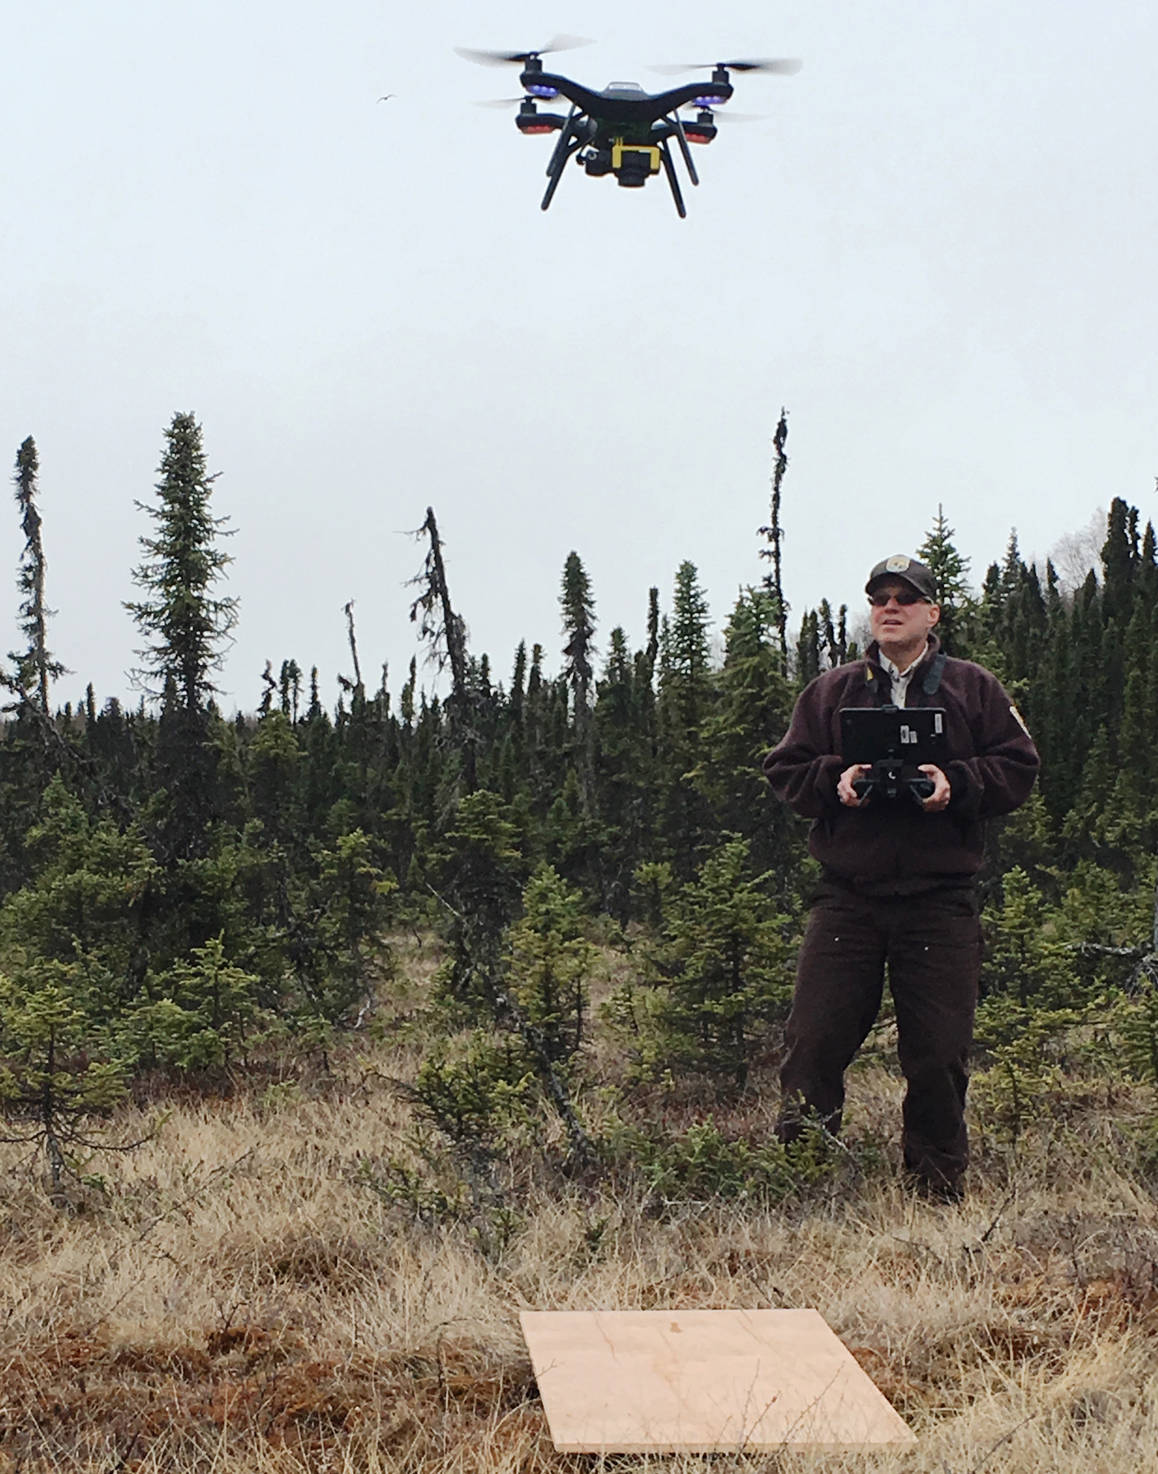 Mark Laker launches a drone on an automated aerial photography mission to survey Aleutian Terns on the Kenai National Wildlife Refuge. (Photo courtesy Kenai National Wildlife Refuge)